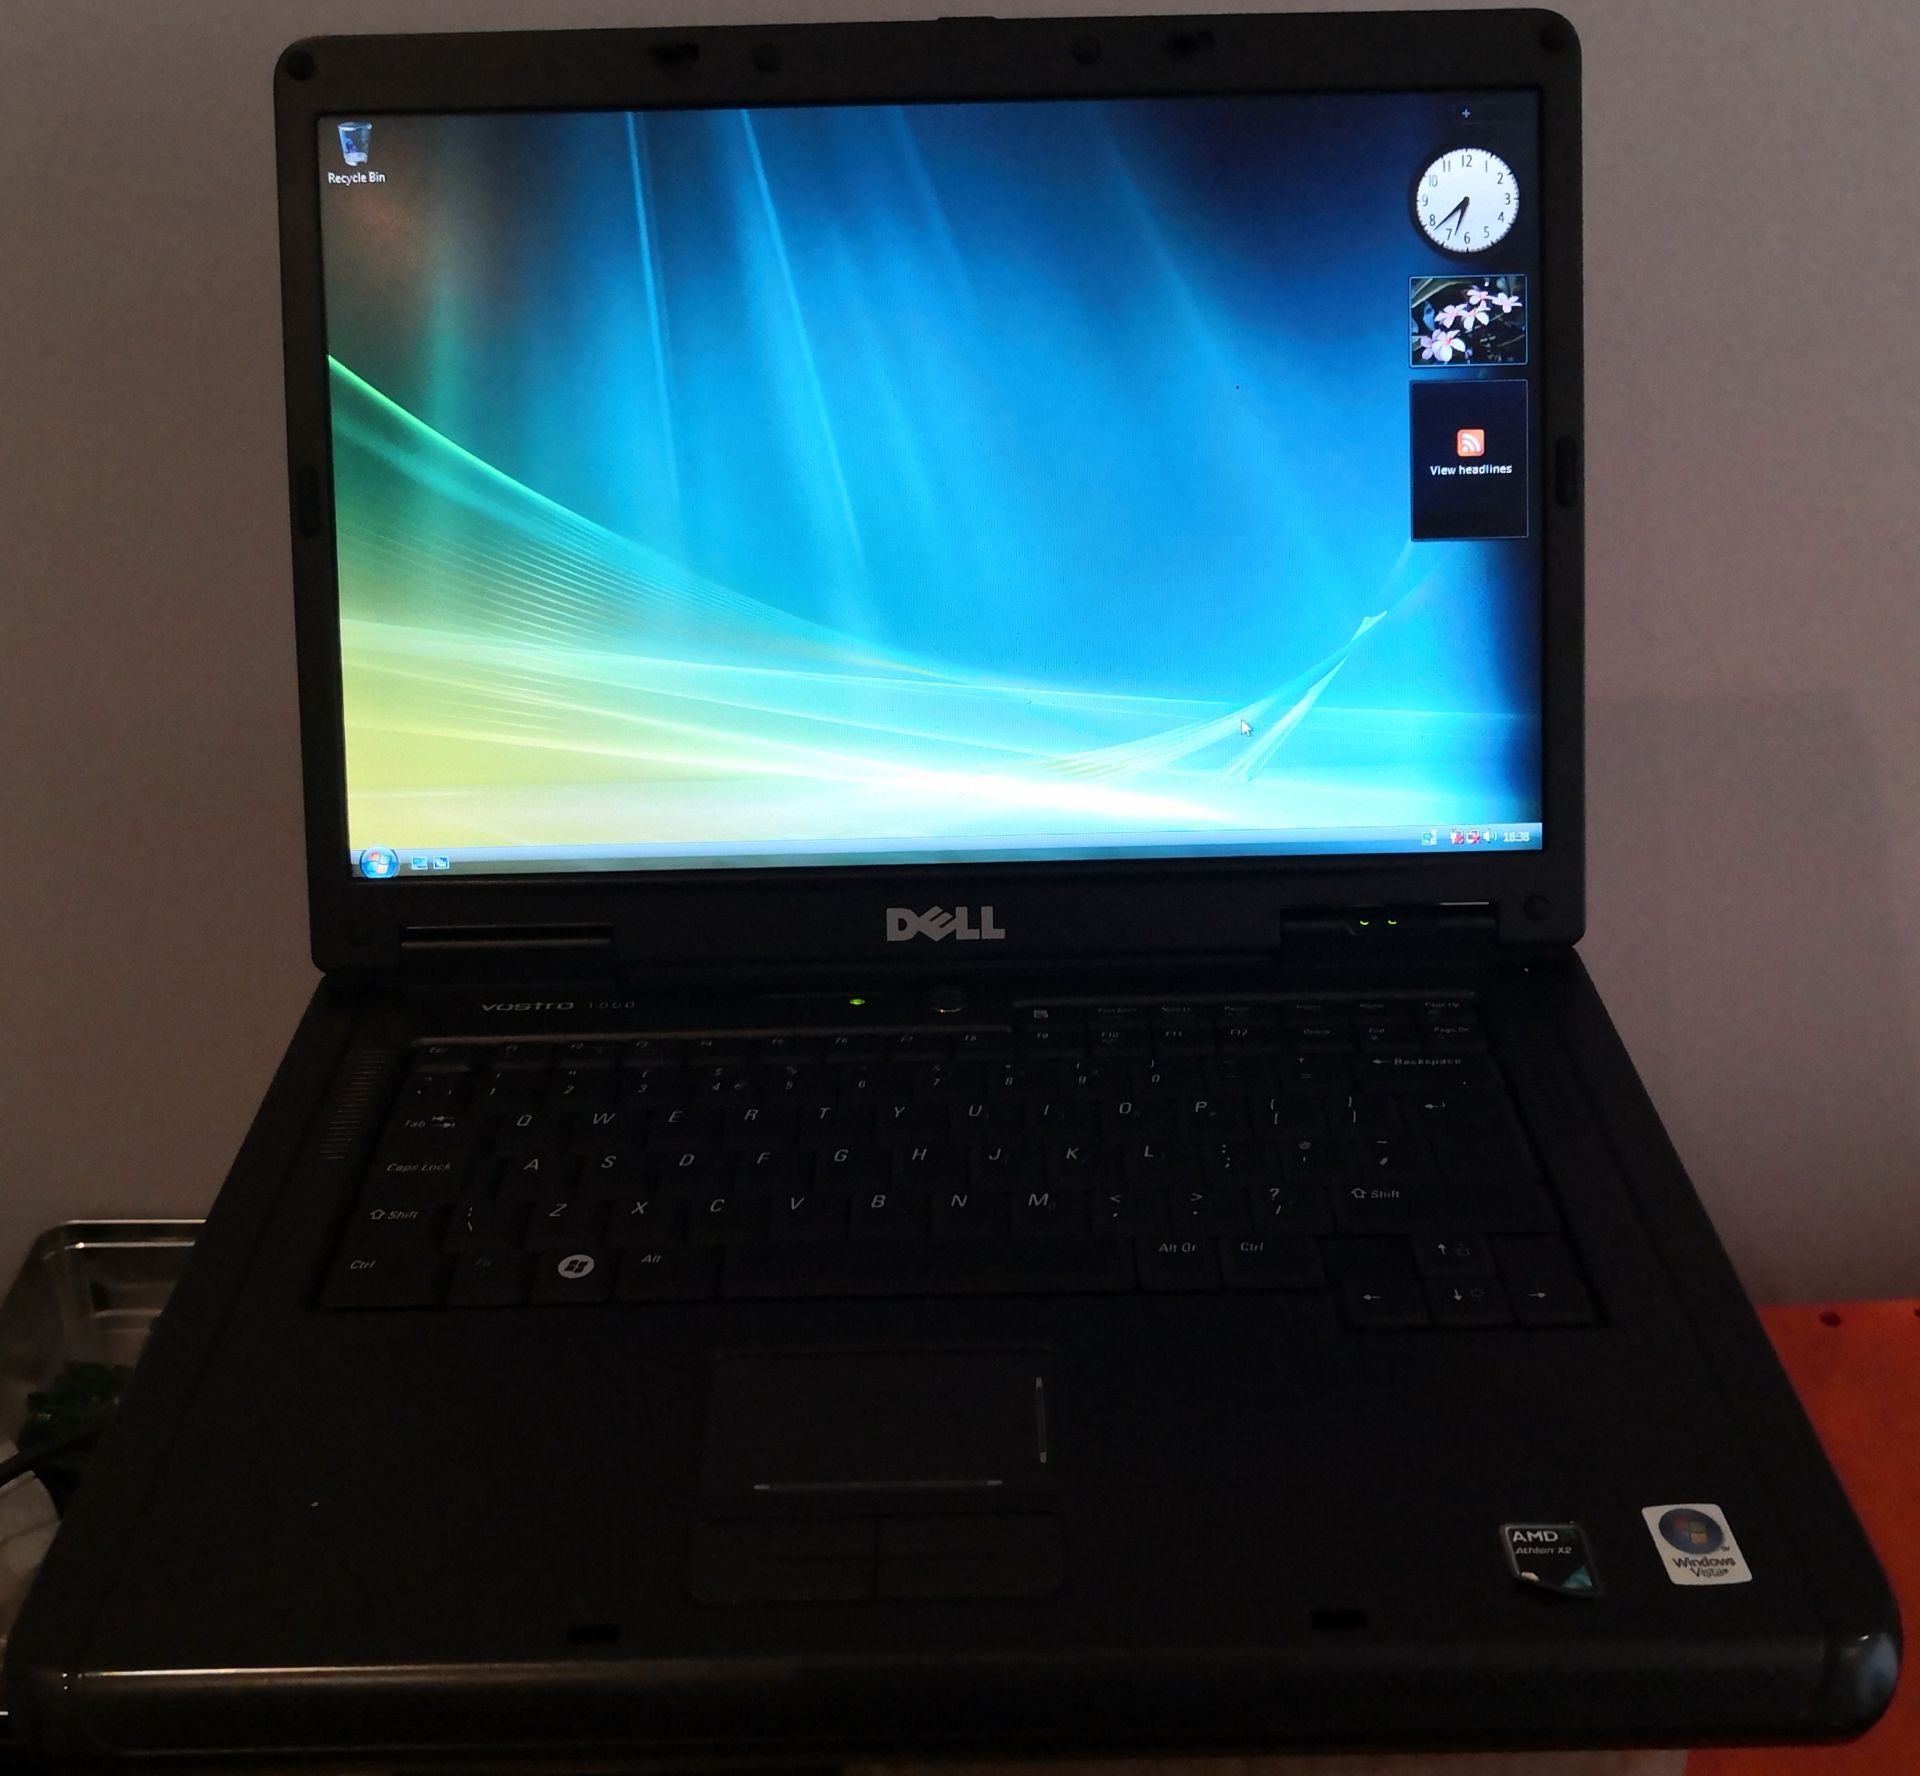 DELL VOSTRO V1000 LAPTOP WINDOWS VISTA BUSINESS NO BATTERY - WITH CHARGER - Image 2 of 2